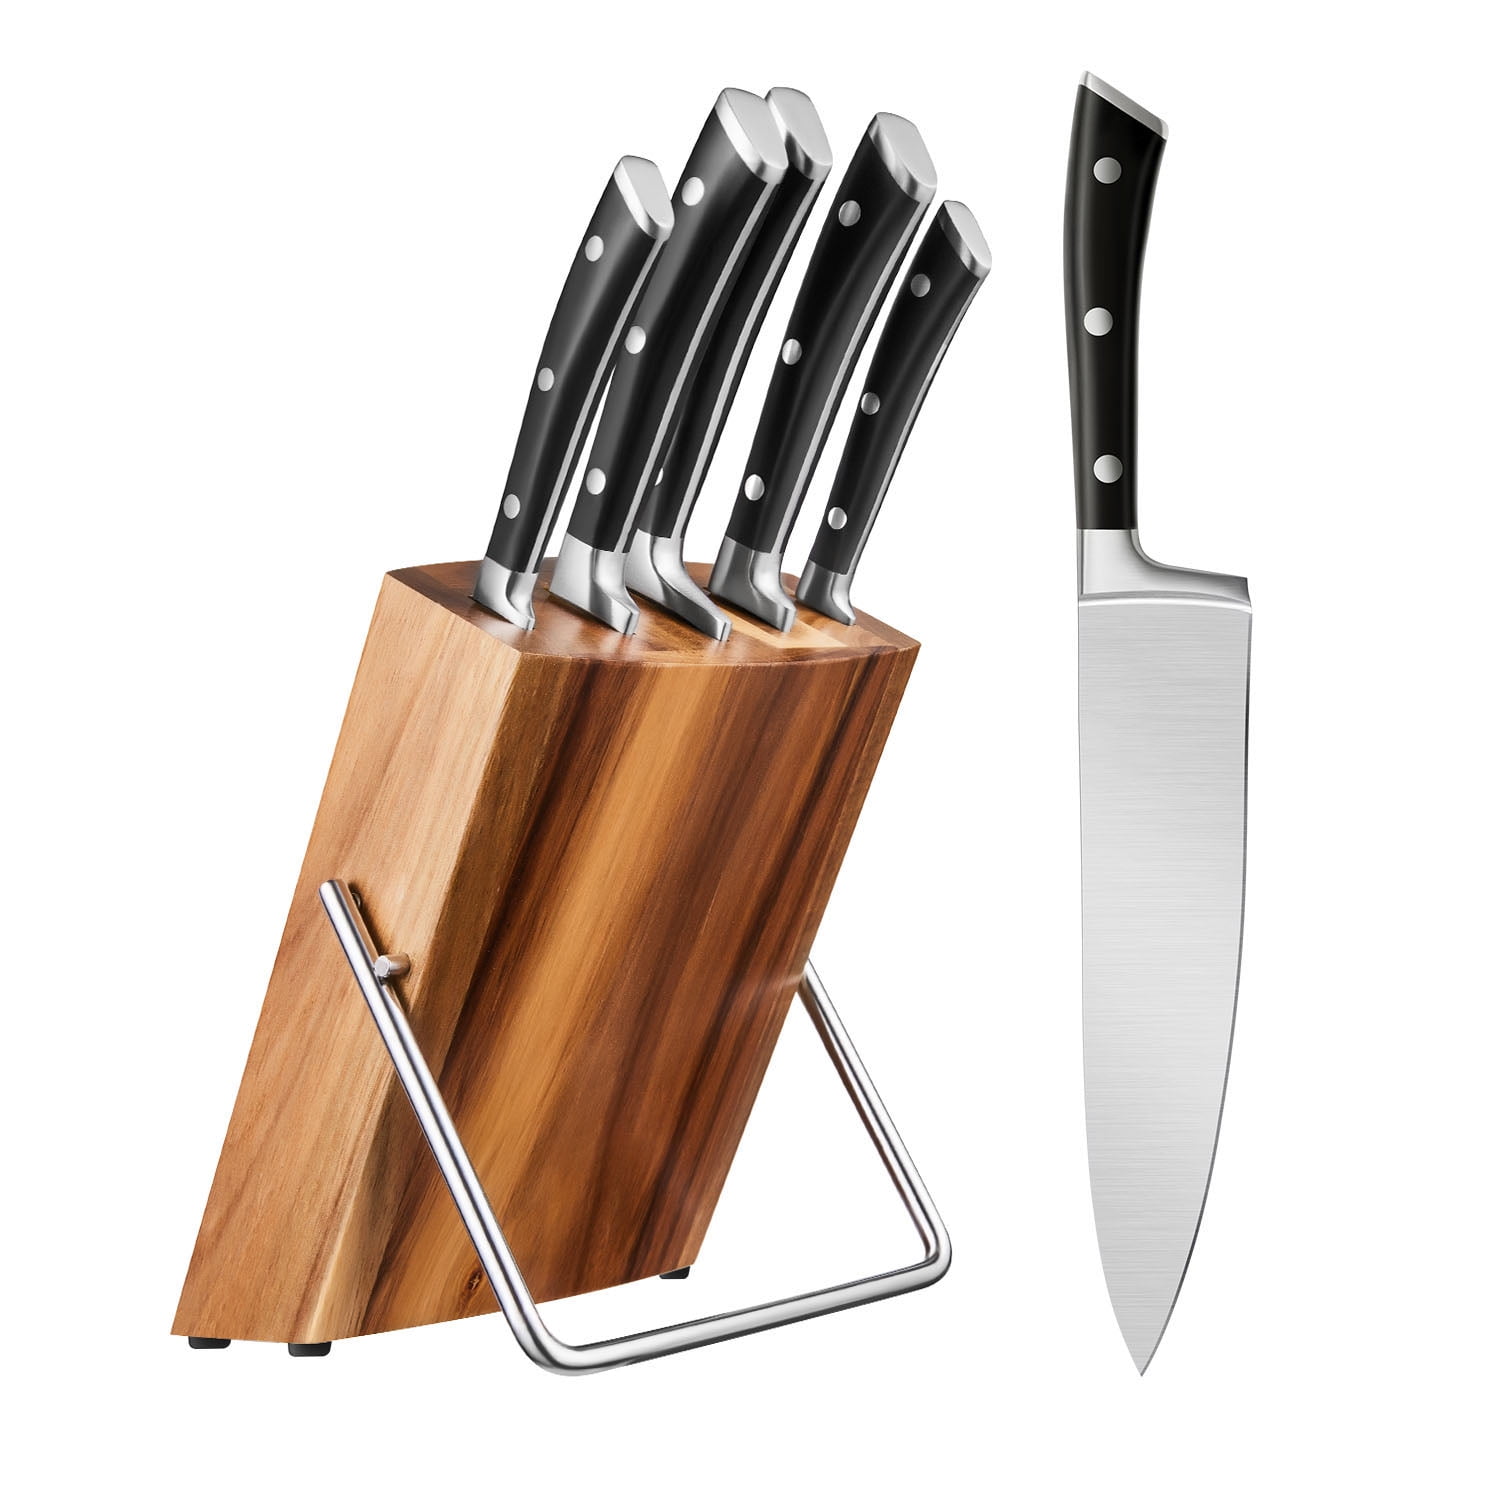 Aiheal Knife Set, 14PCS Stainless Steel Kitchen Knife Set with